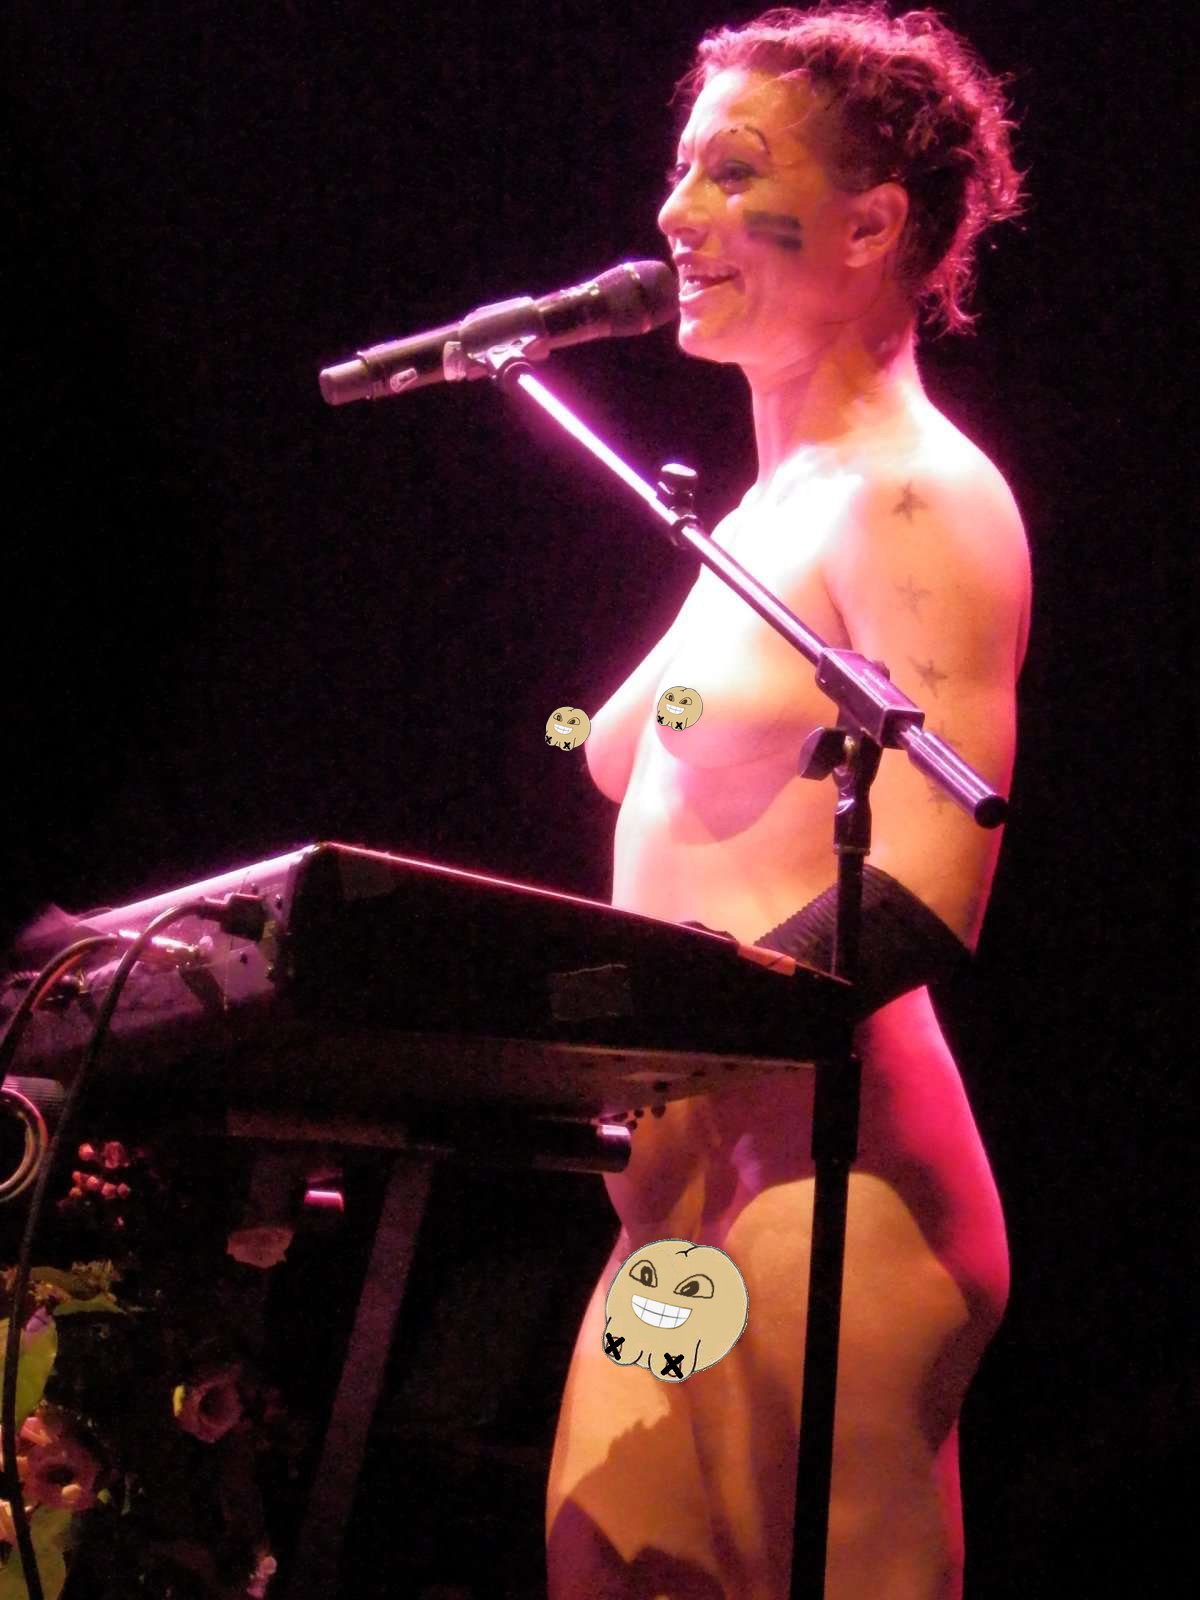 Nude Singer On Stage